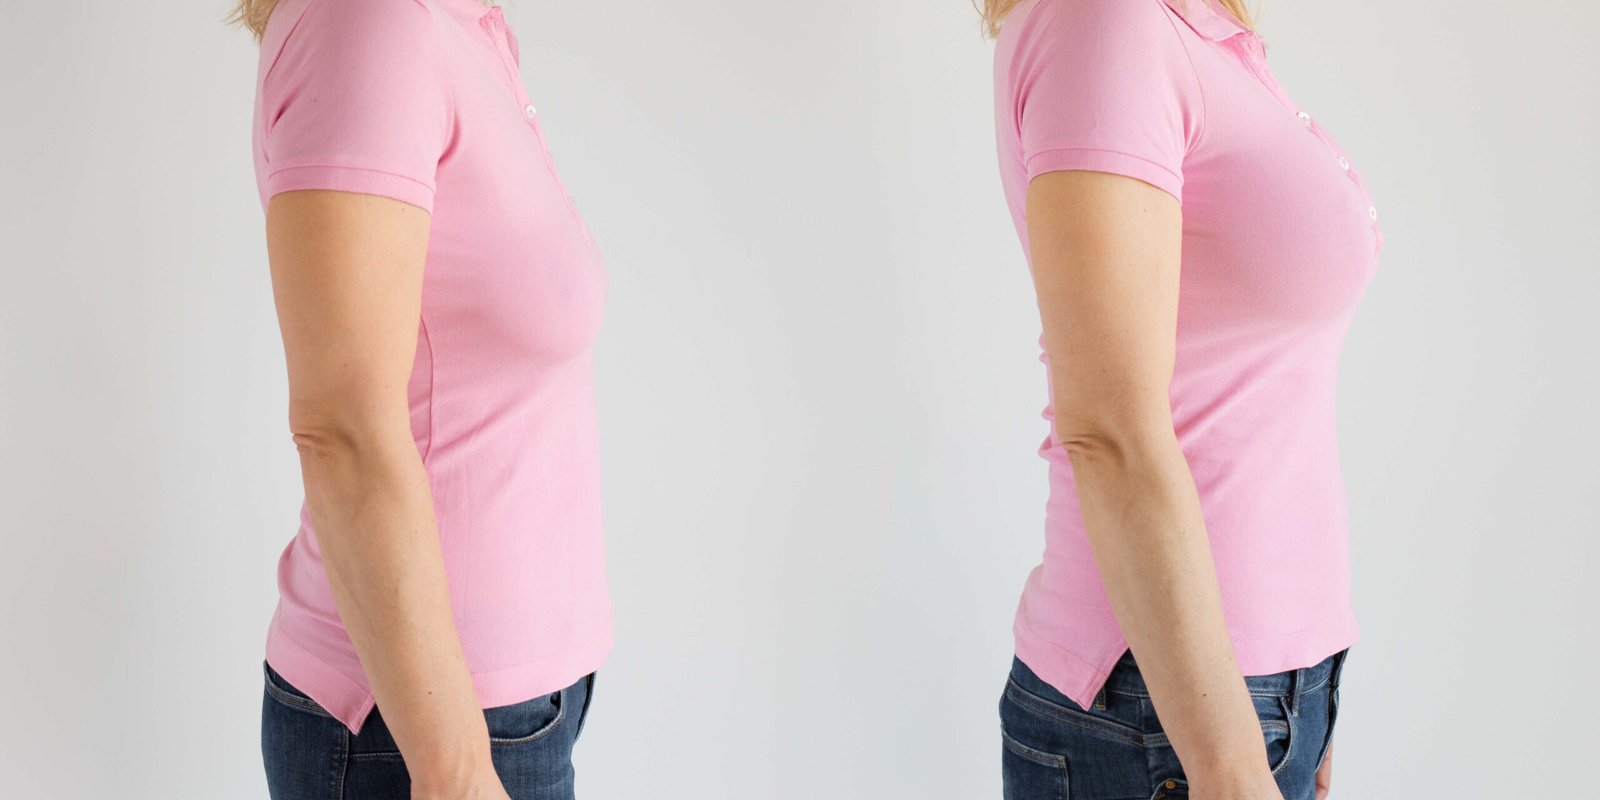 4 Breast enlarging exercises that are highly effective